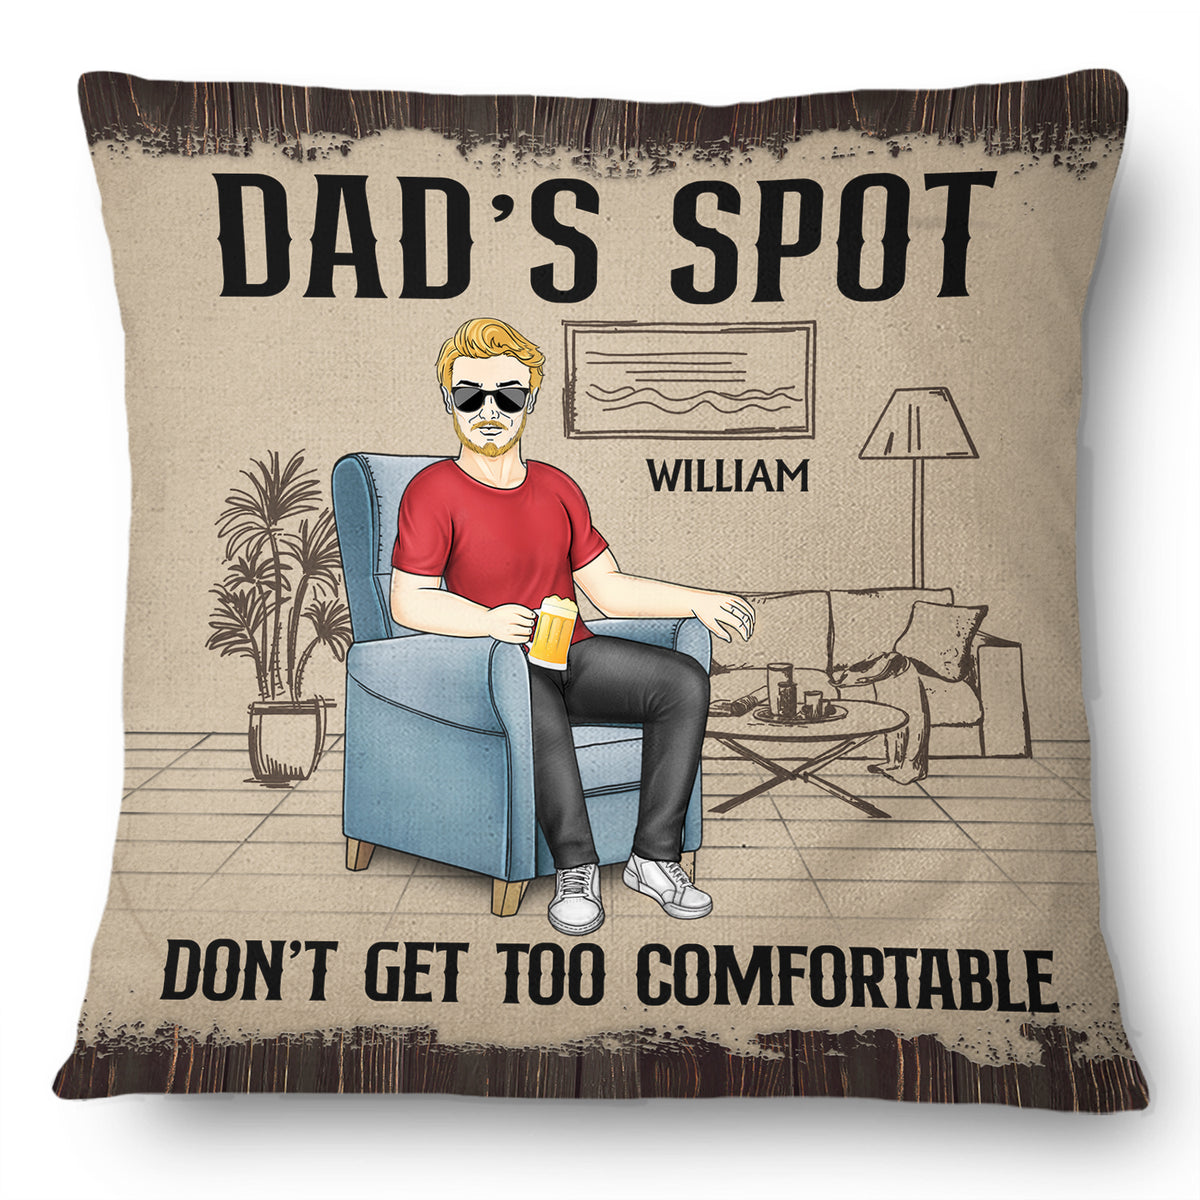 Personalized Birthday LED Pillow for Boys: Gift/Send Home and Living Gifts  Online J11114651 |IGP.com